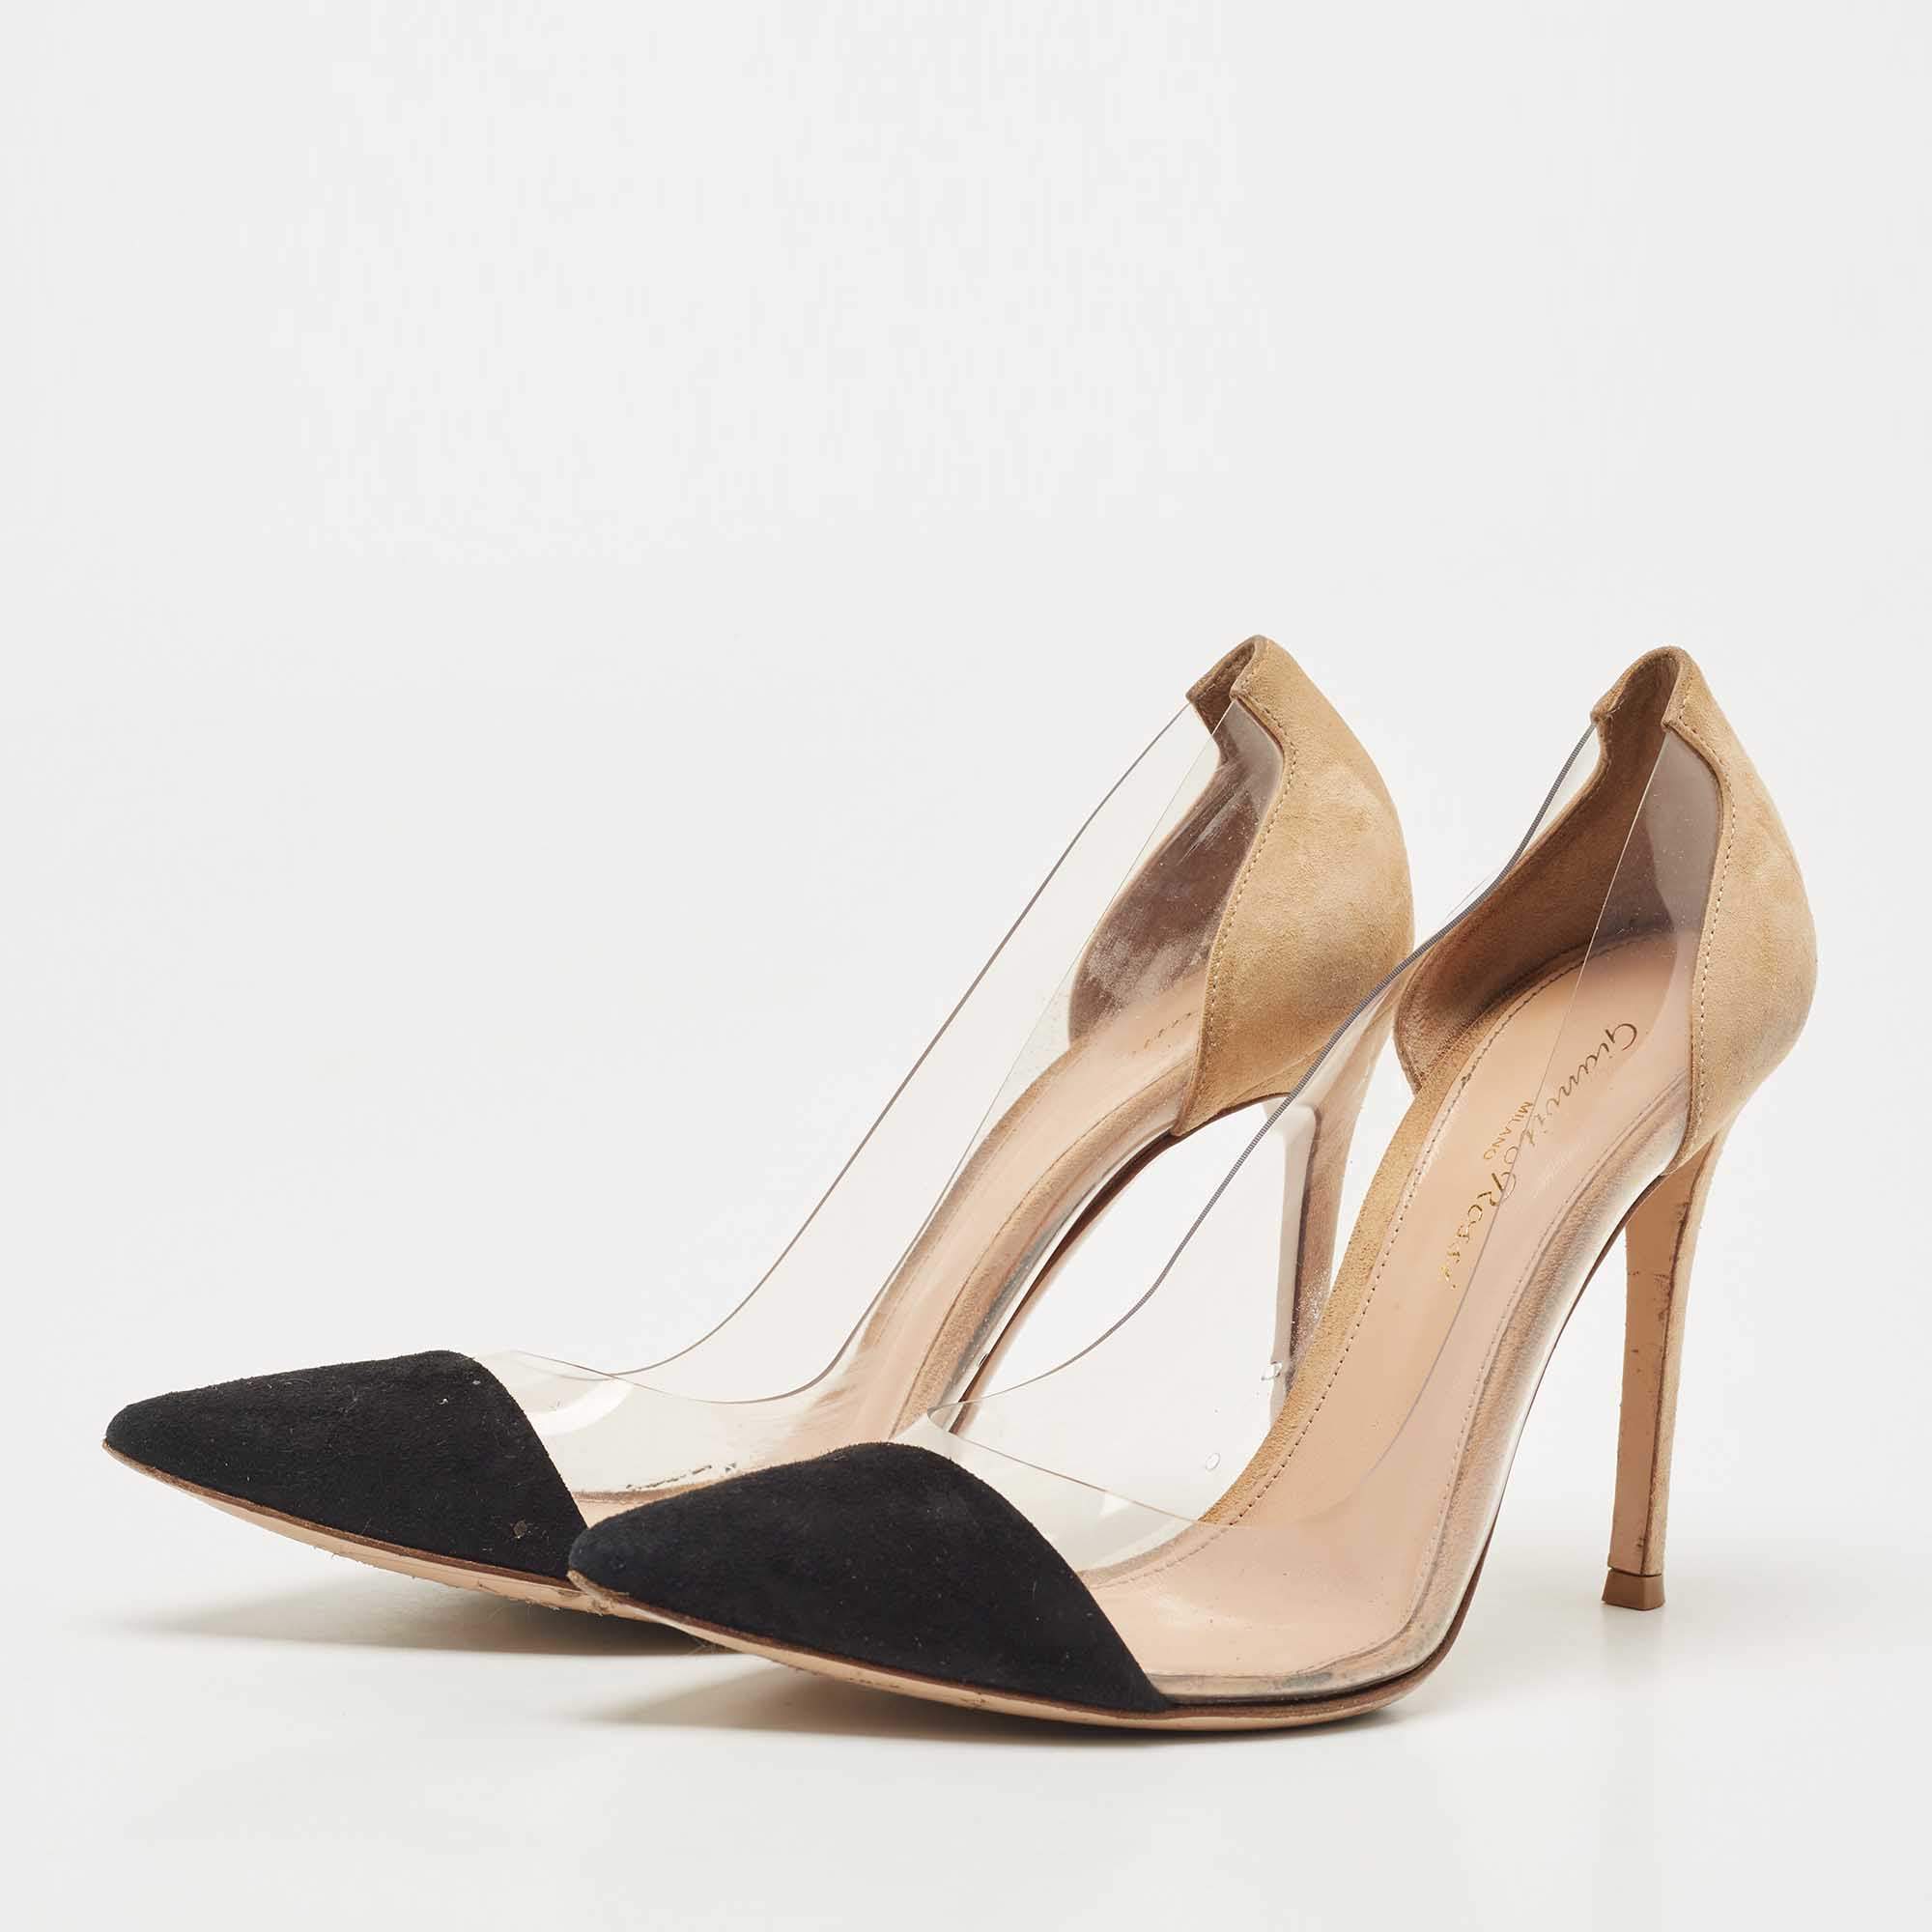 Gianvito Rossi Beige/Black Suede and PVC Plexi Pointed Toe Pumps